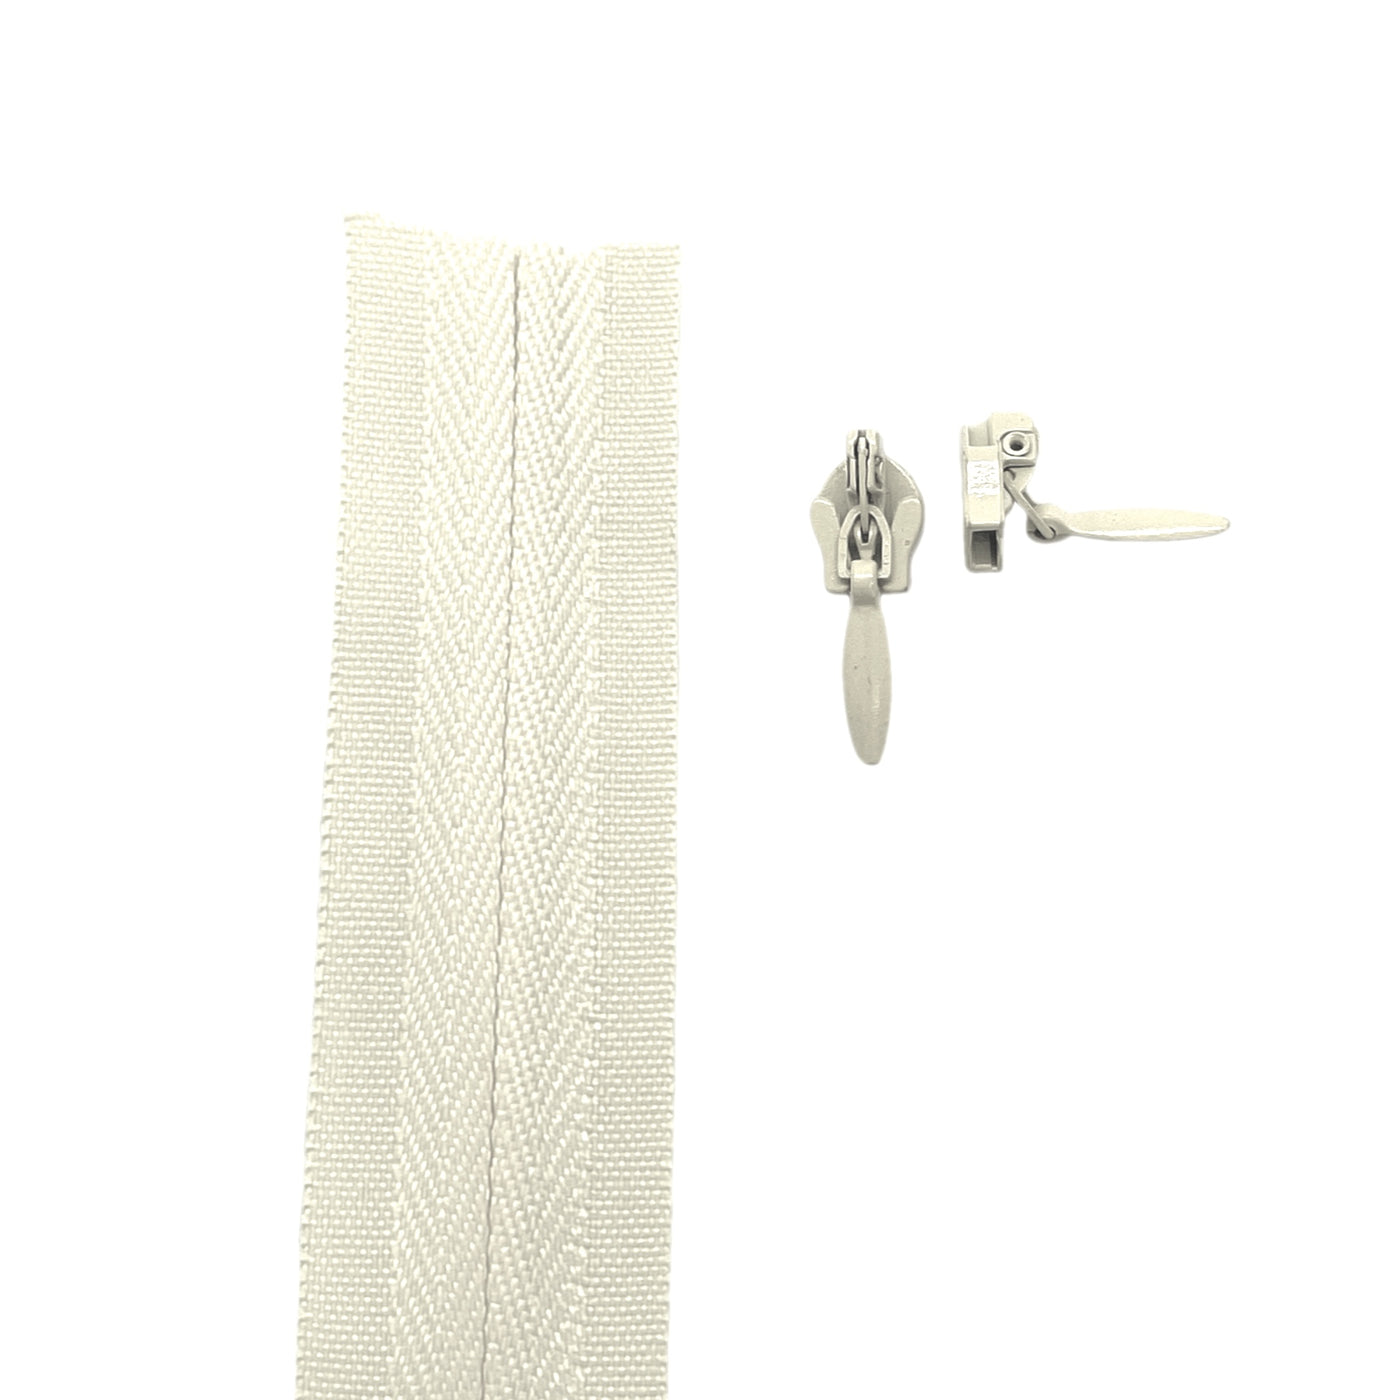 ivory off white Invisible continuous zipper roll in long chain style with sliders of 2 per metre